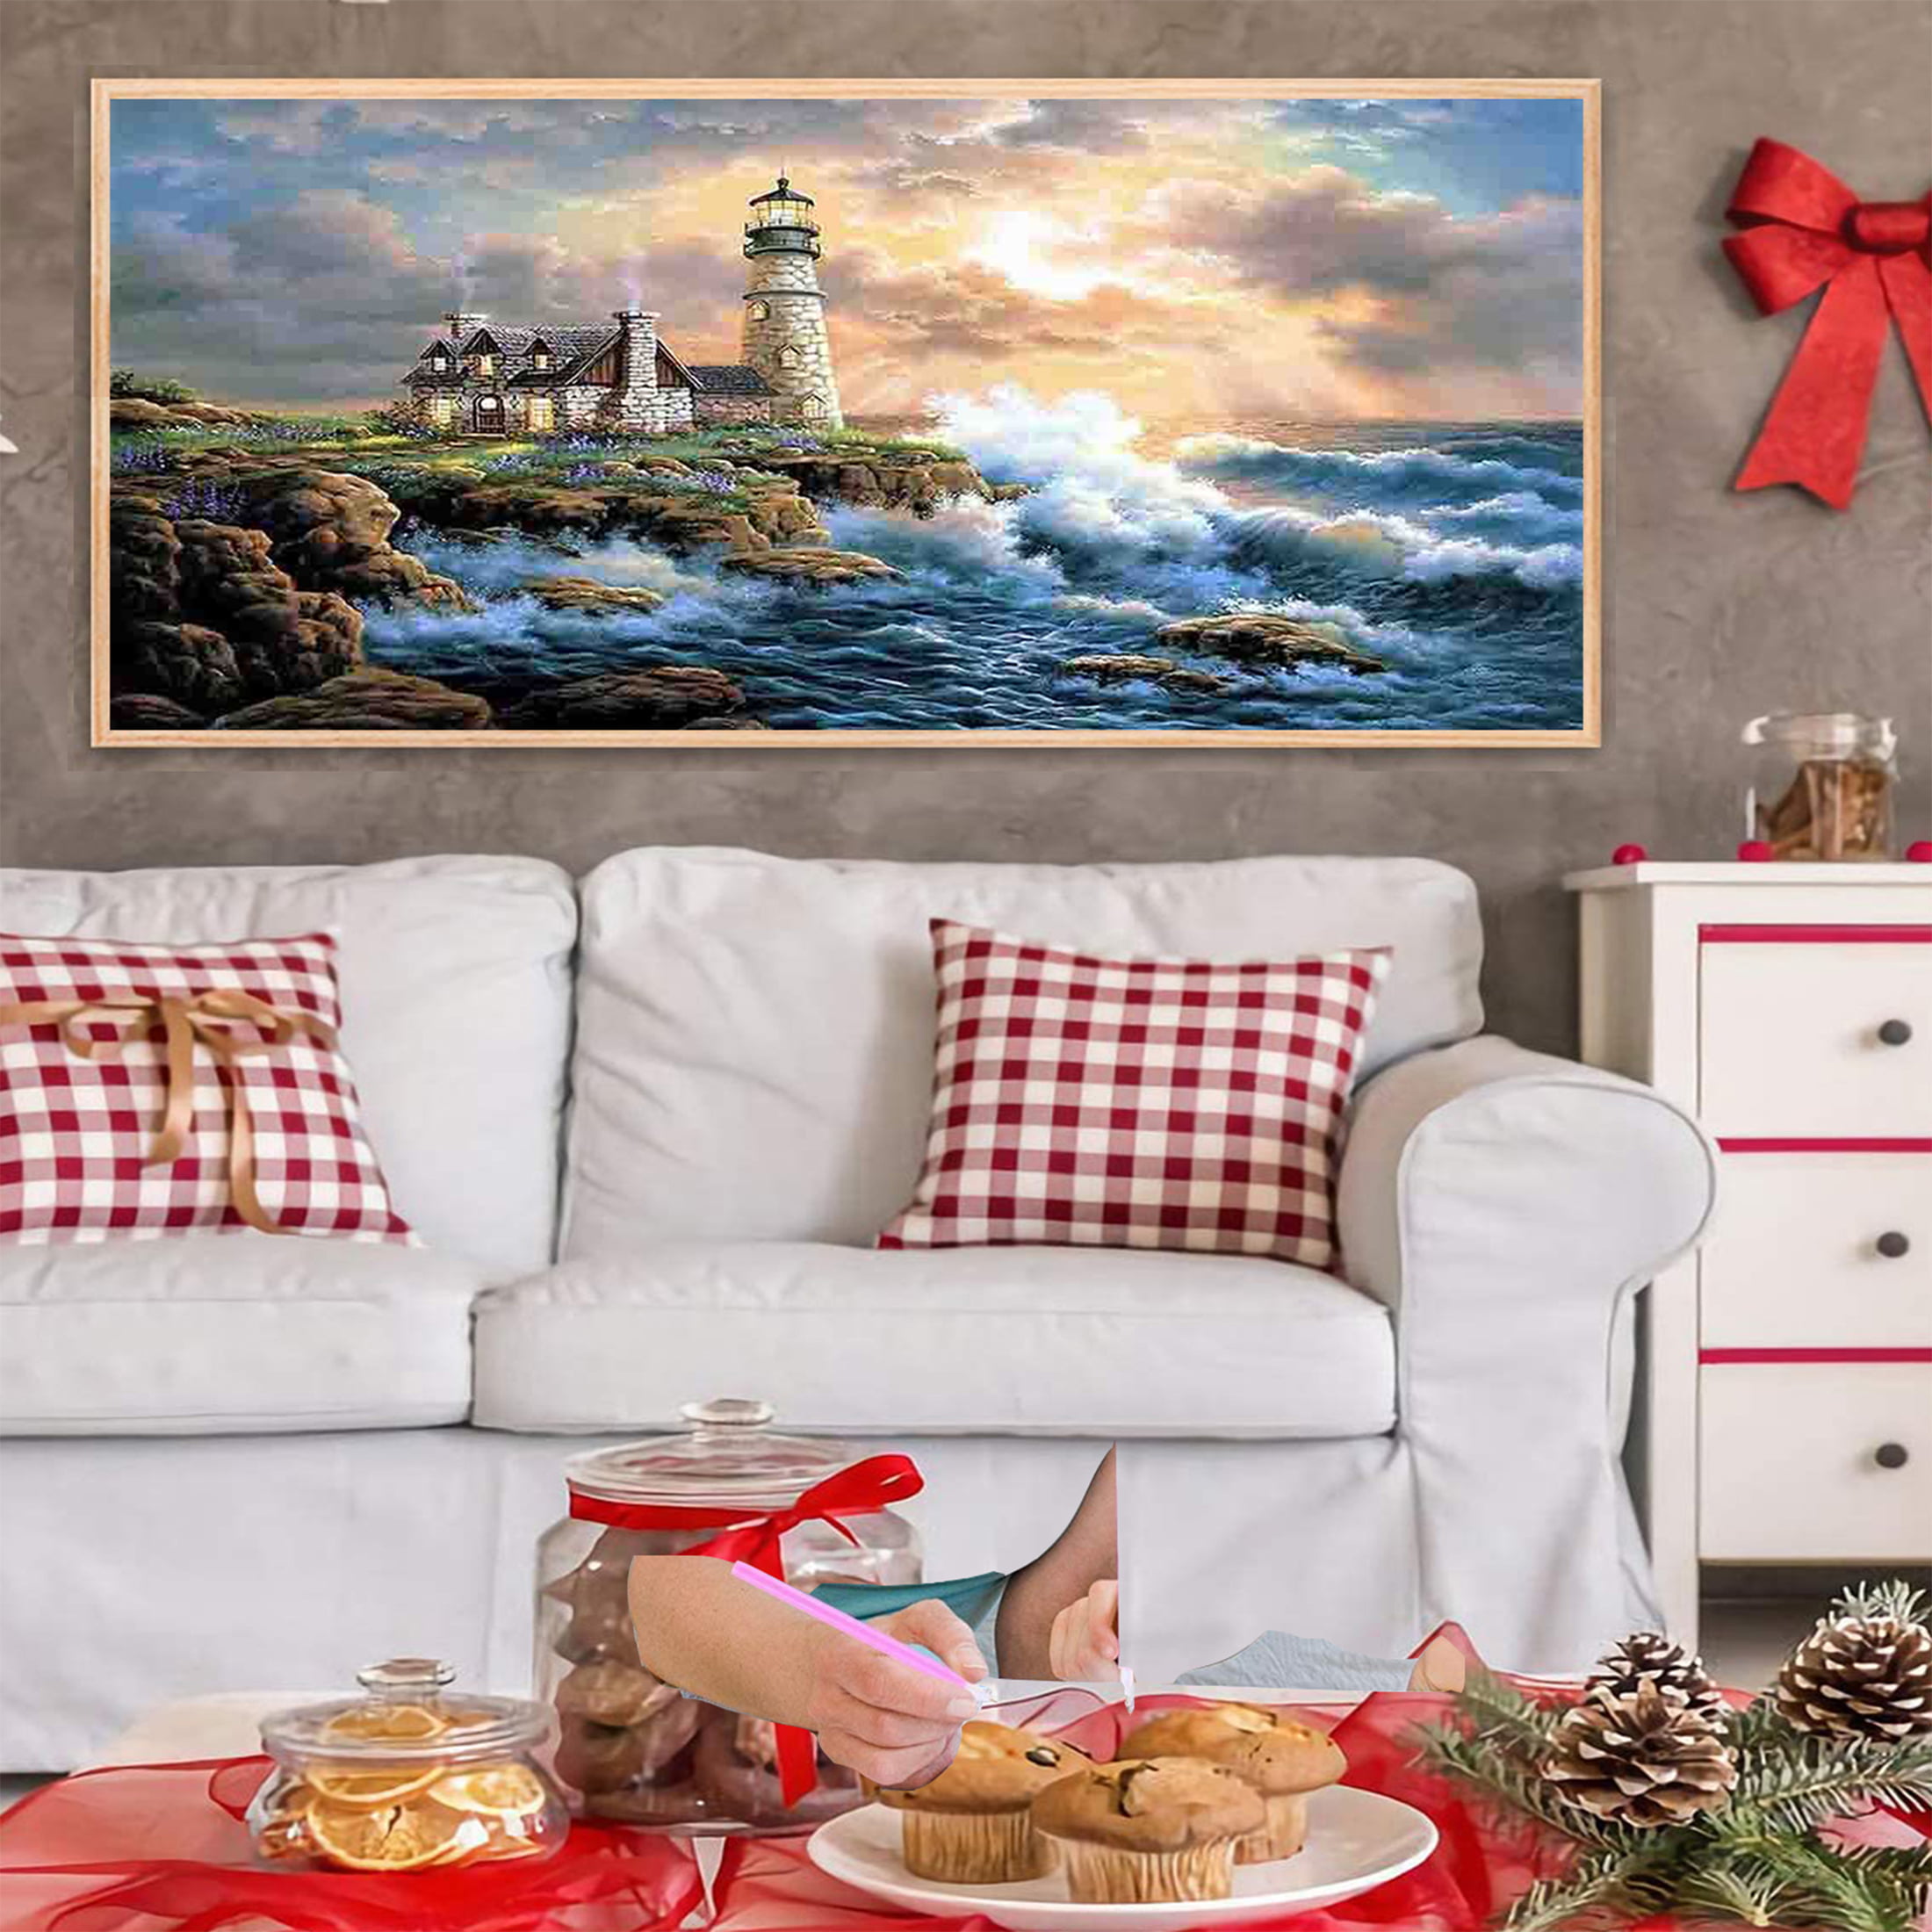  JATOK Large Diamond Painting Kits for Adults (35.5 x 15.7 inch)  DIY 5D Lighthouse Full Round Drill Crystal Rhinestone Embroidery Pictures  Arts Paint by Diamond Art Kits for Home Wall Decor